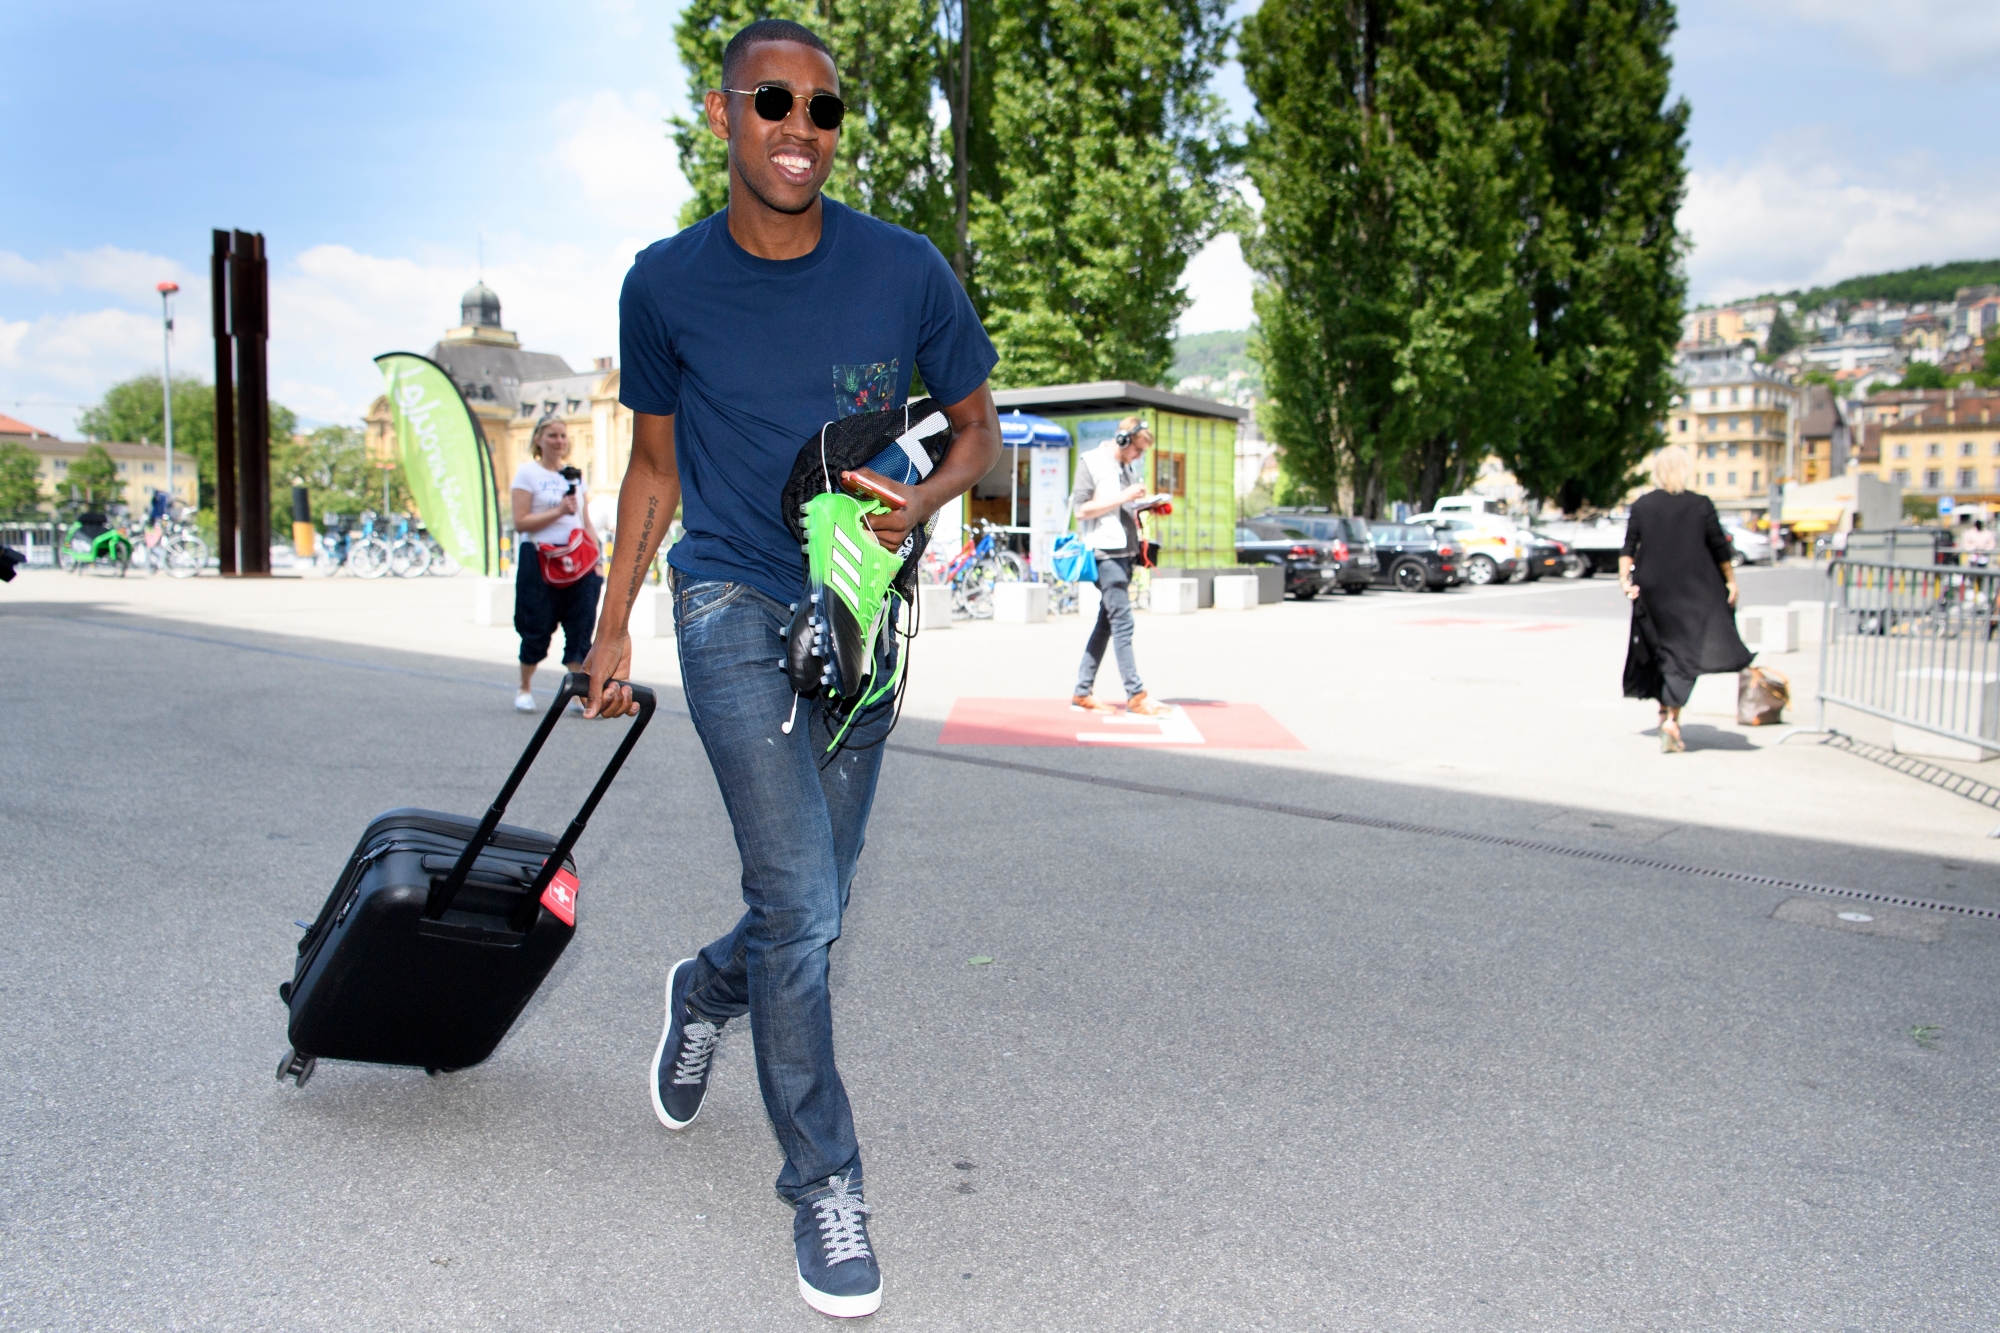 Swiss national team soccer player Gelson Fernandes arrives at the hotel of the Swiss soccer national team, in Neuchatel, Switzerland, Wednesday, May 24, 2017. Switzerland will play Belarus on June 1st in Neuchatel for a friendly soccer match on the side line of the 2018 Fifa World Cup group B qualification. (KEYSTONE/Laurent Gillieron)Gelson Fernandes SWITZERLAND SOCCER TEAM